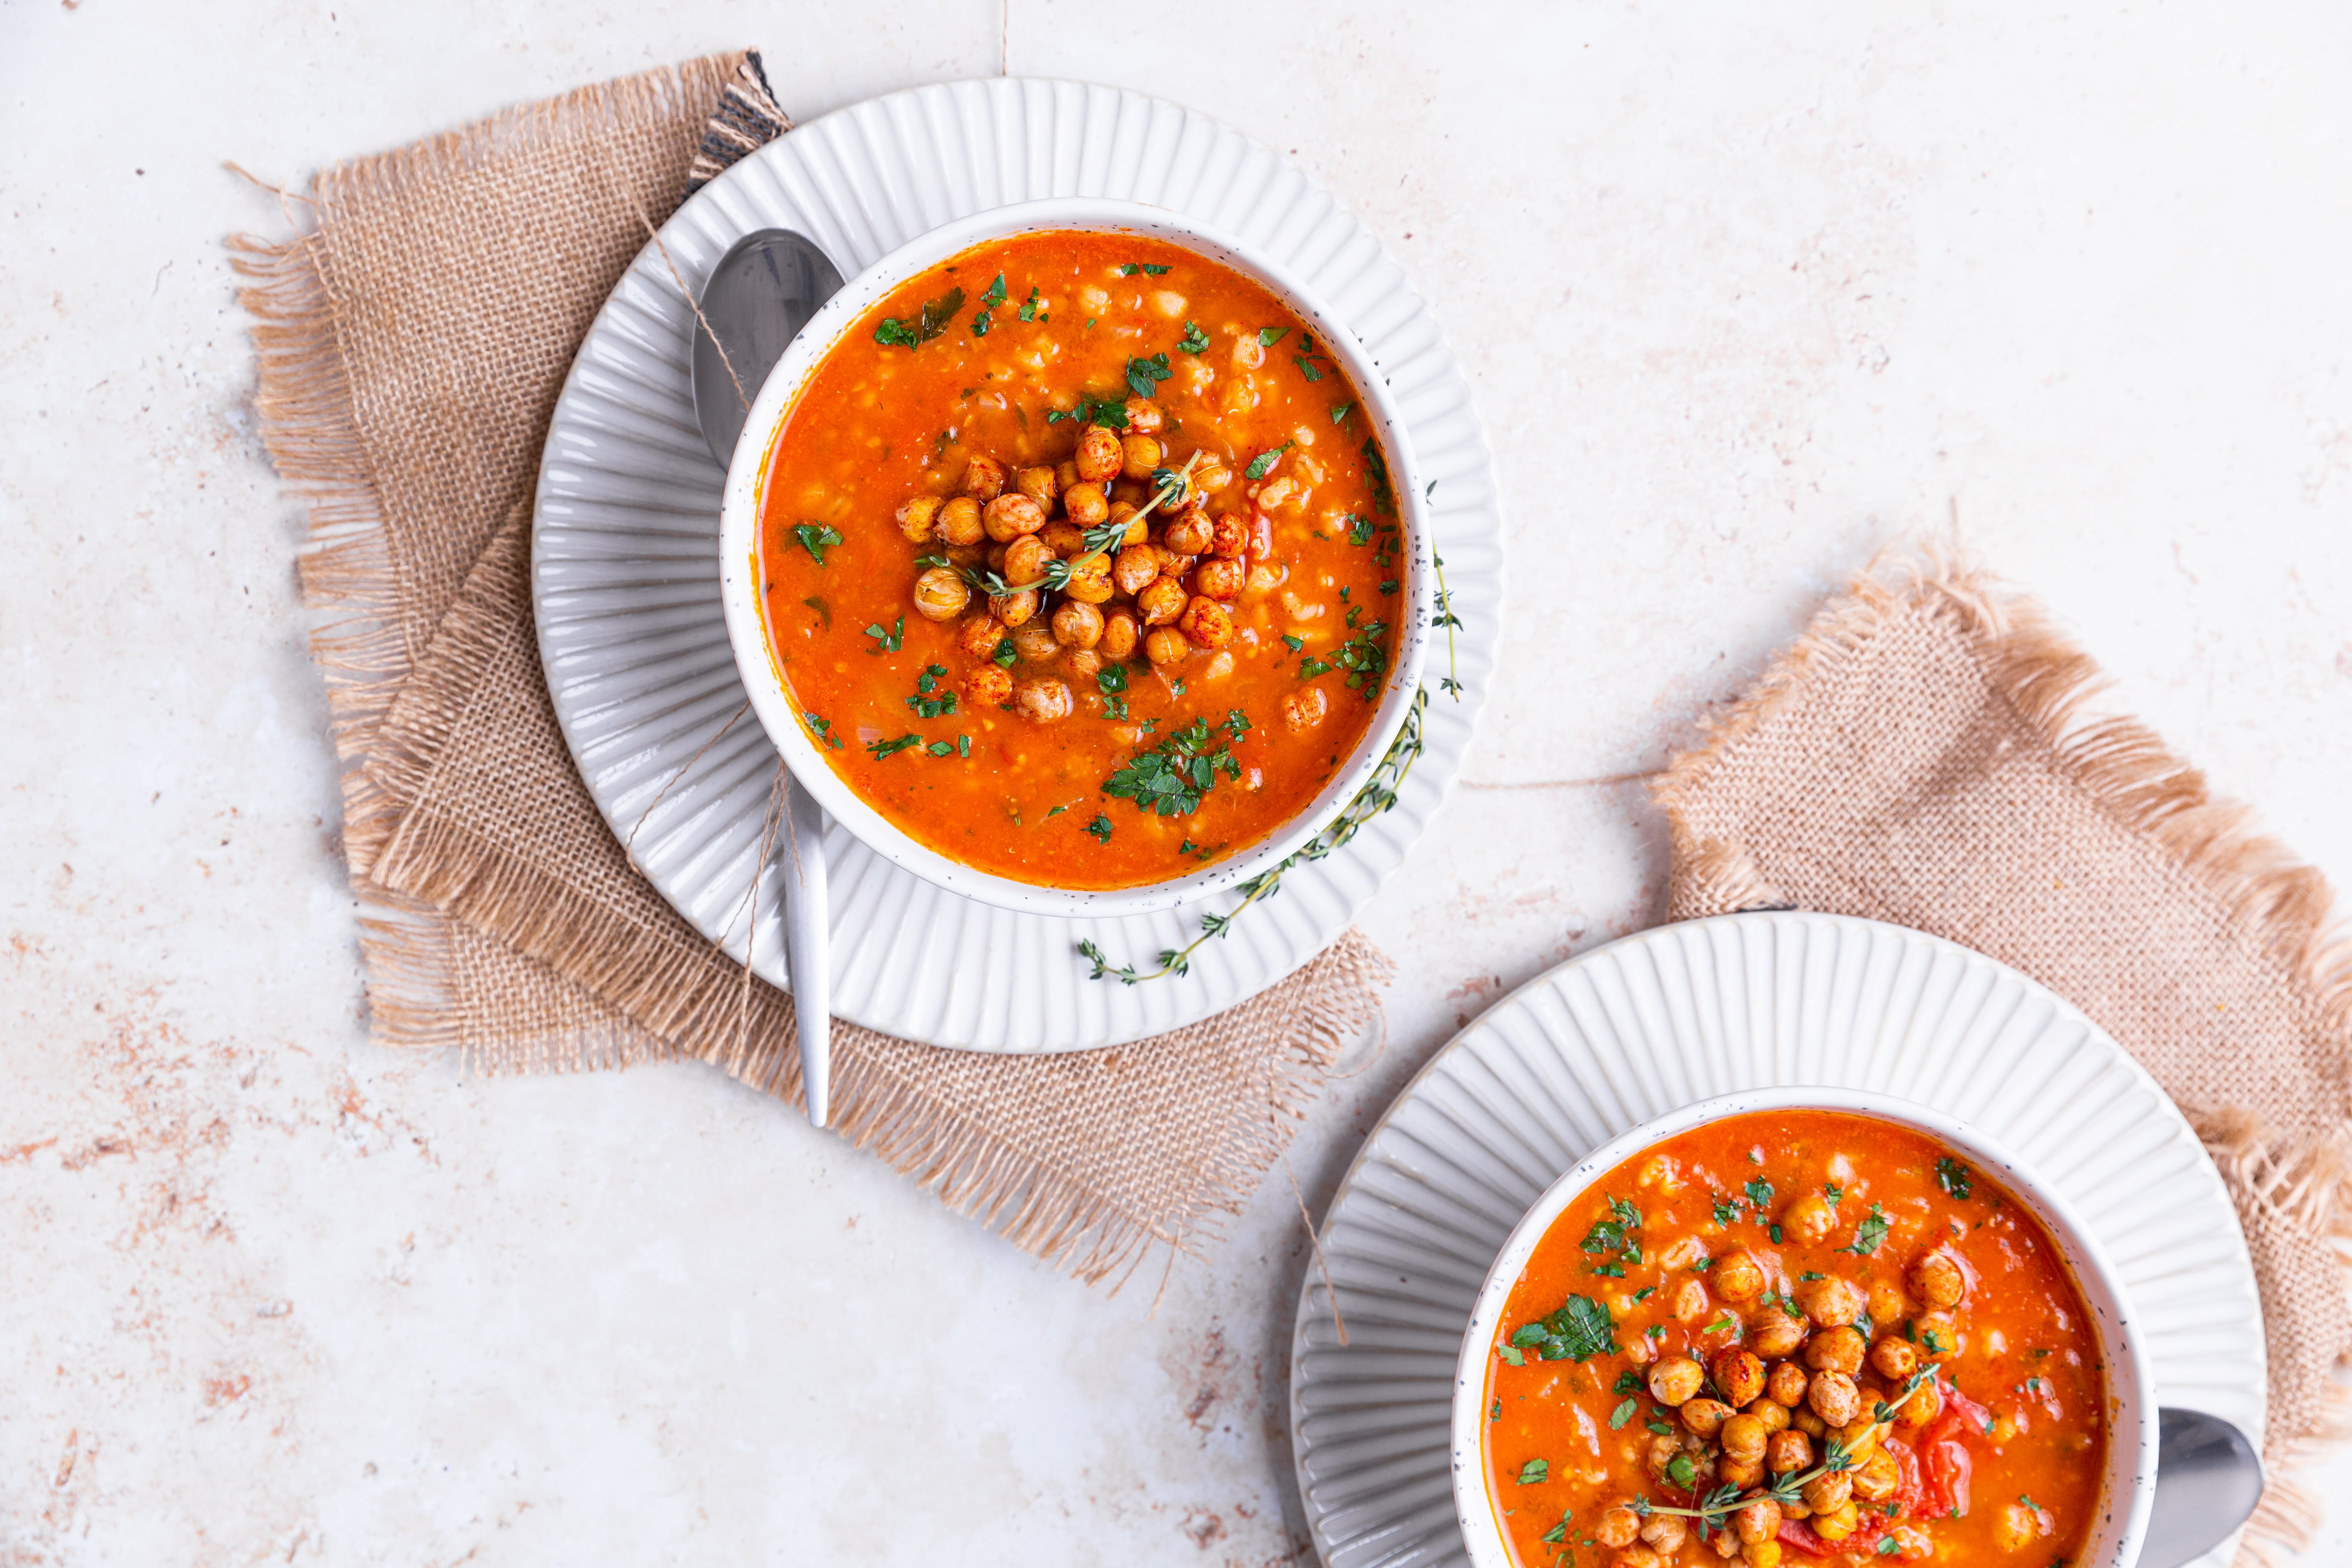 Essential Sports Nutrition – Roasted Tomato & Barley Soup